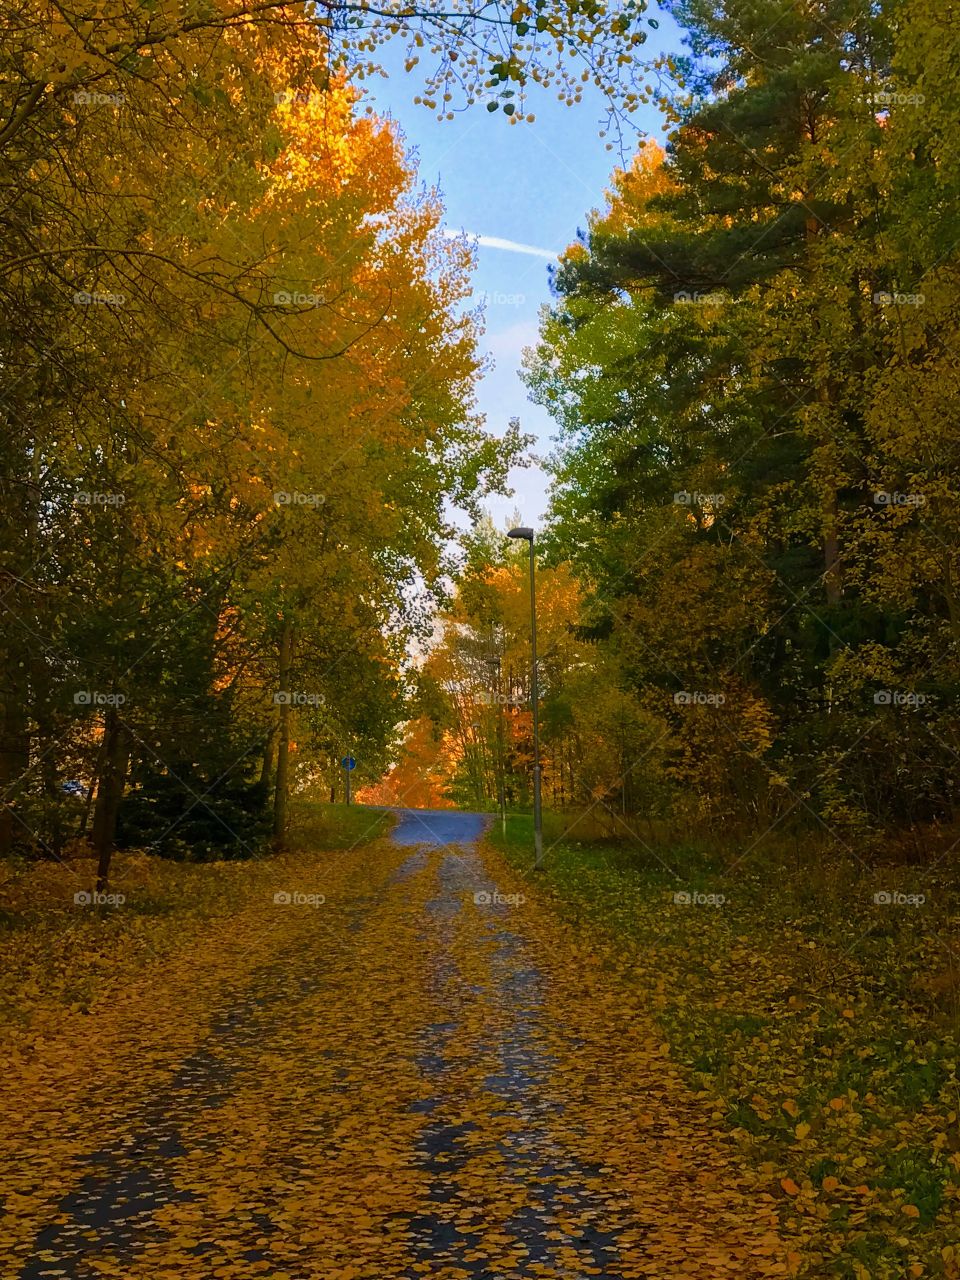 An afternoon in October 